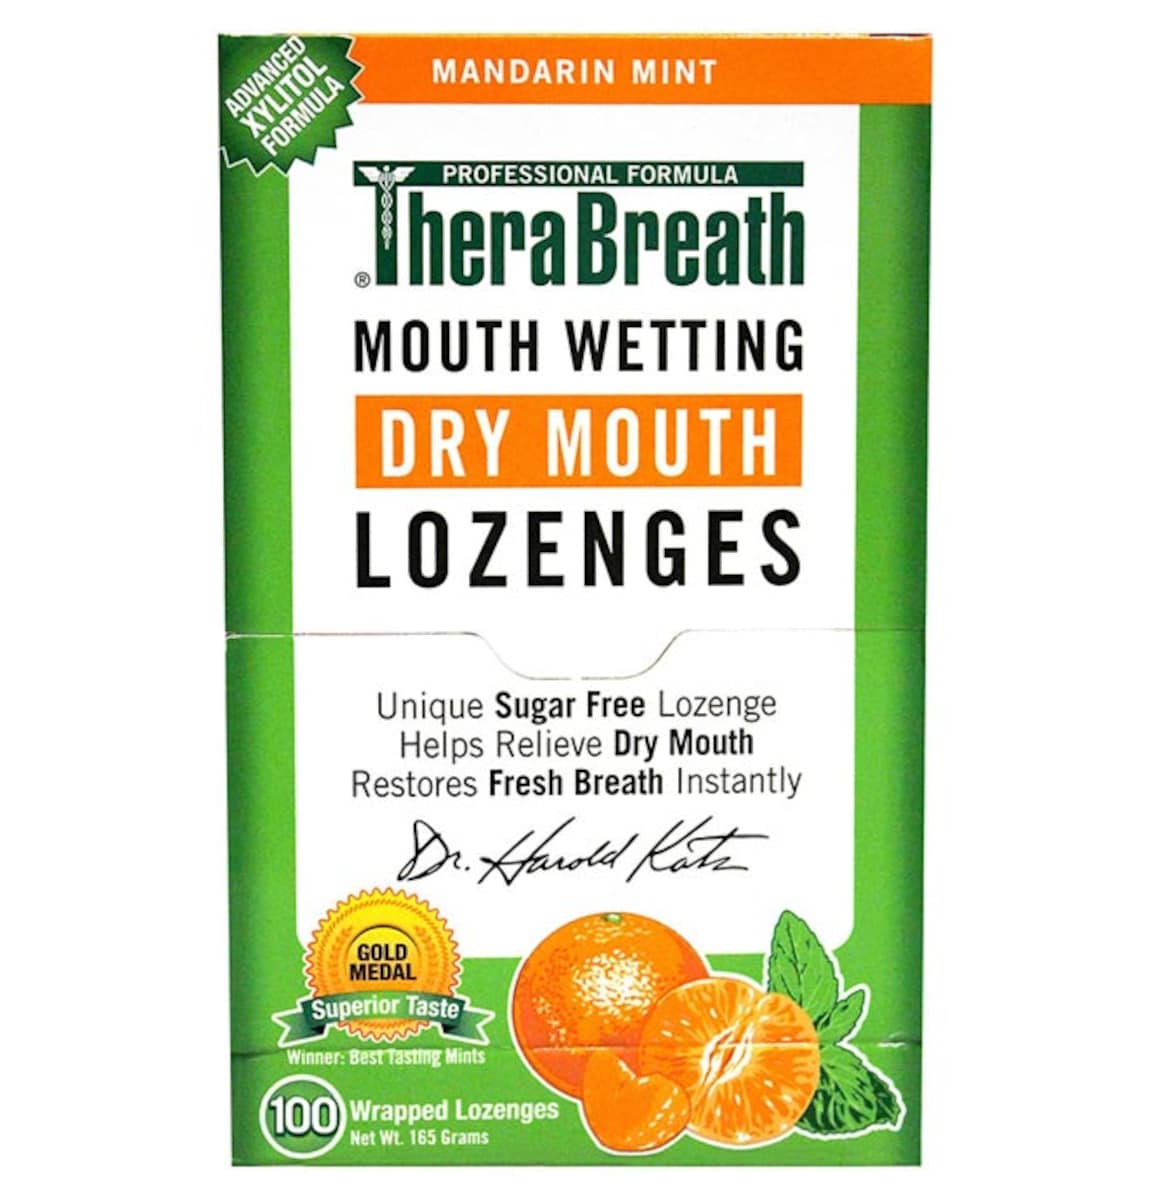 TheraBreath Dry Mouth Lozenges Mandarin Mint 100 Pack